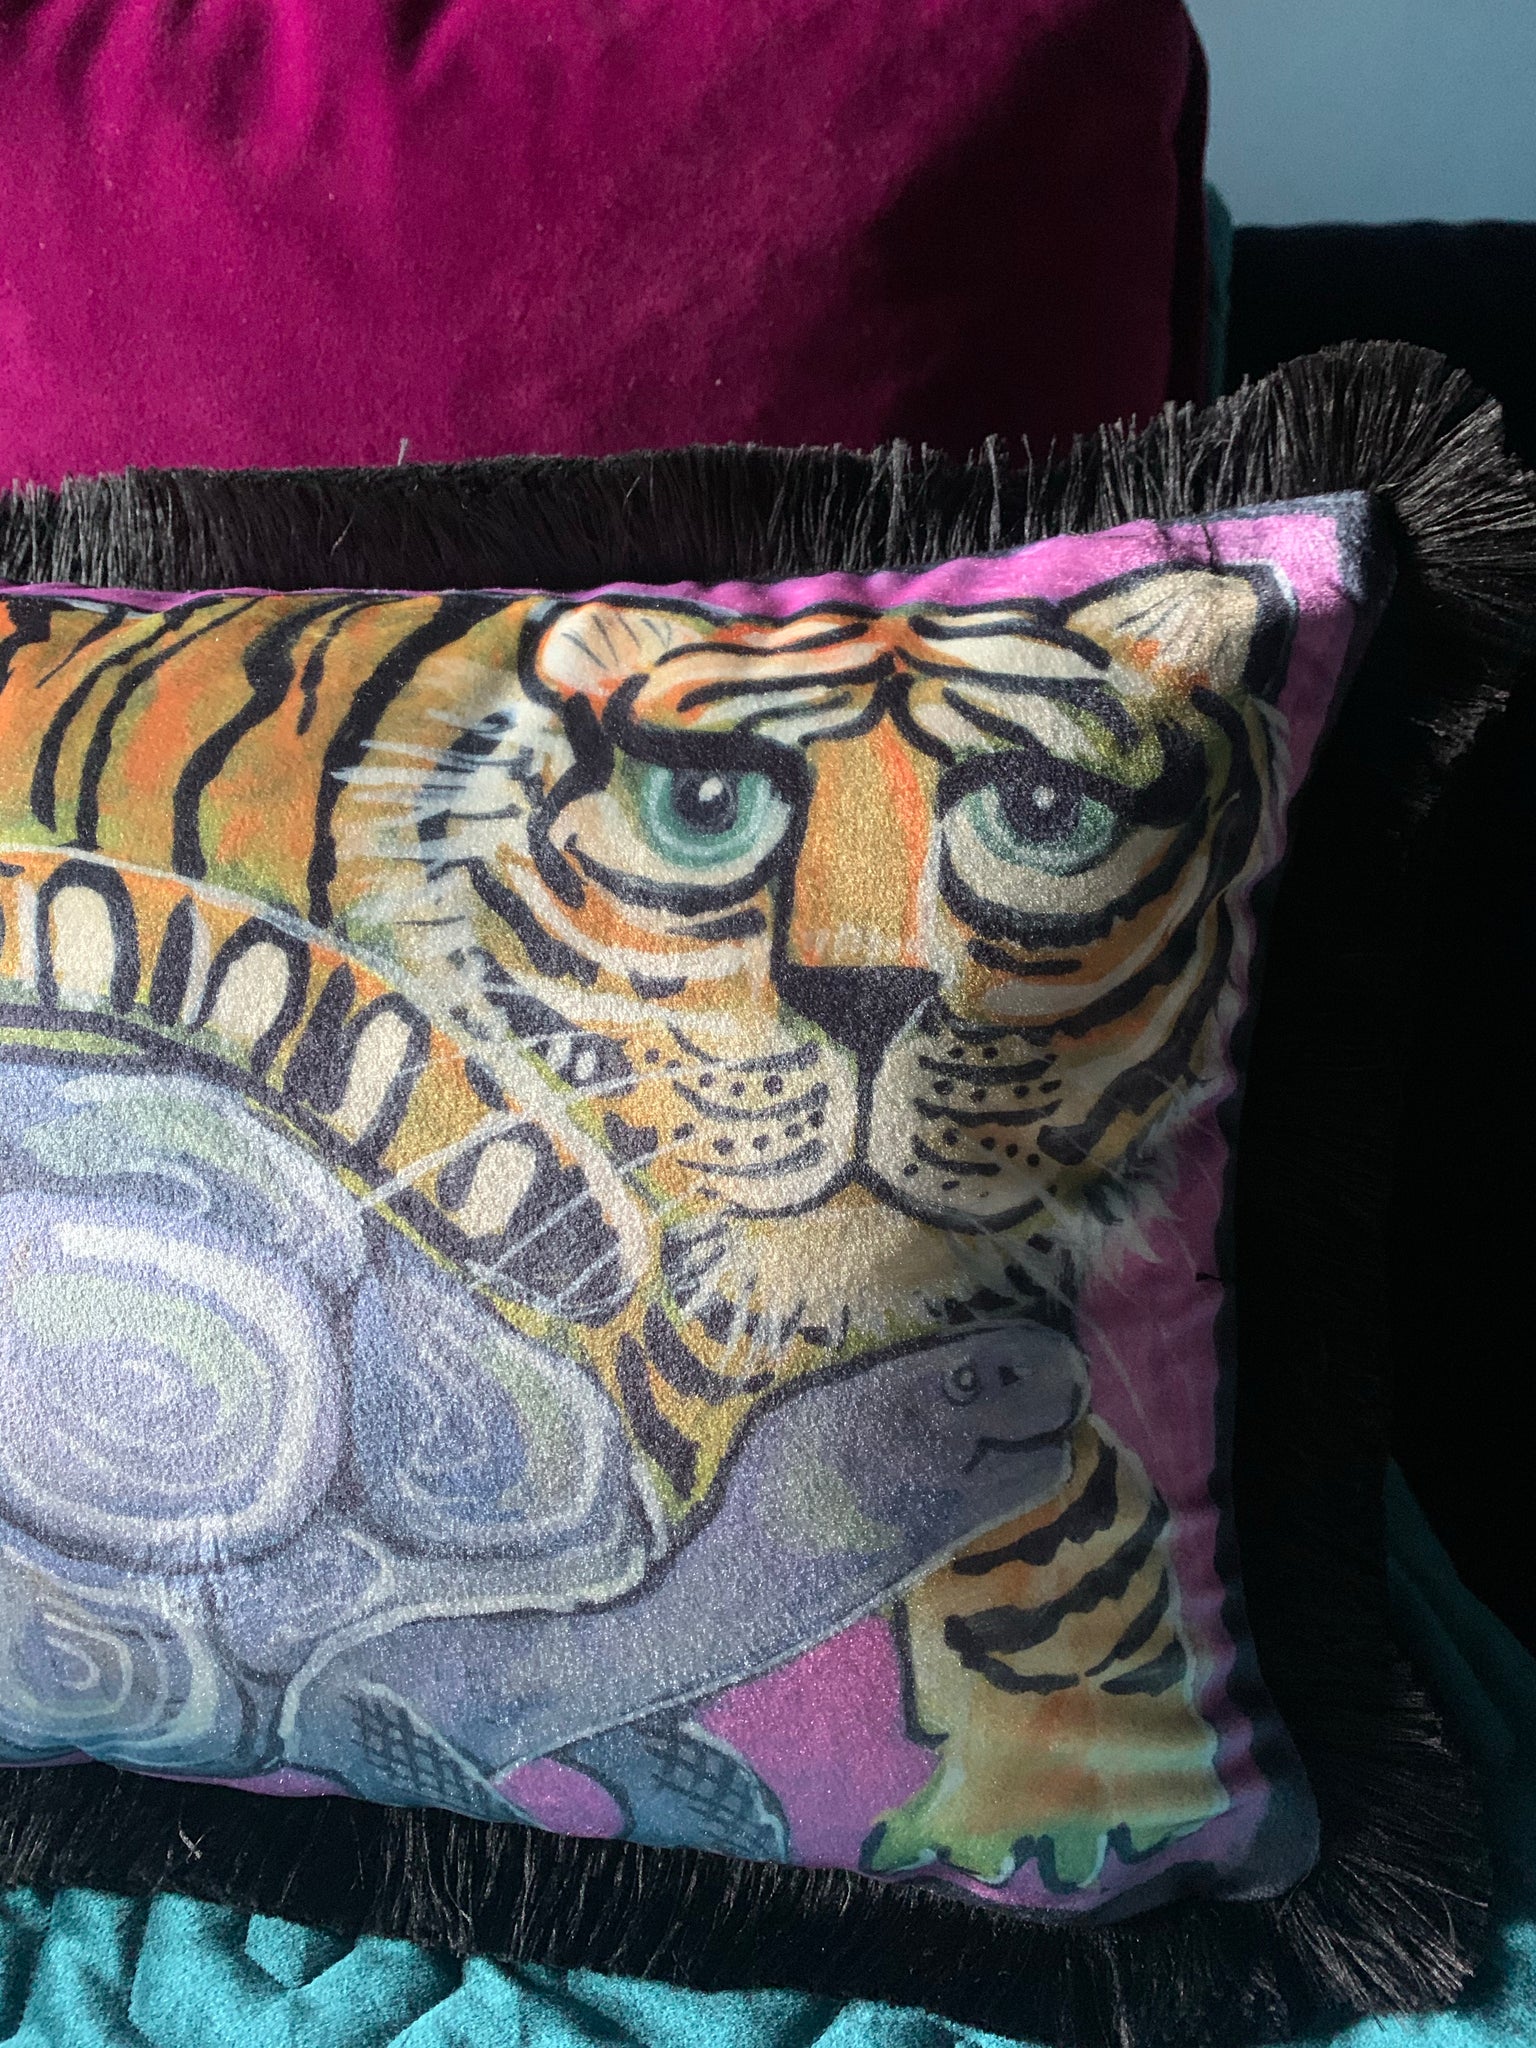 The tiger and the tortoise cushion